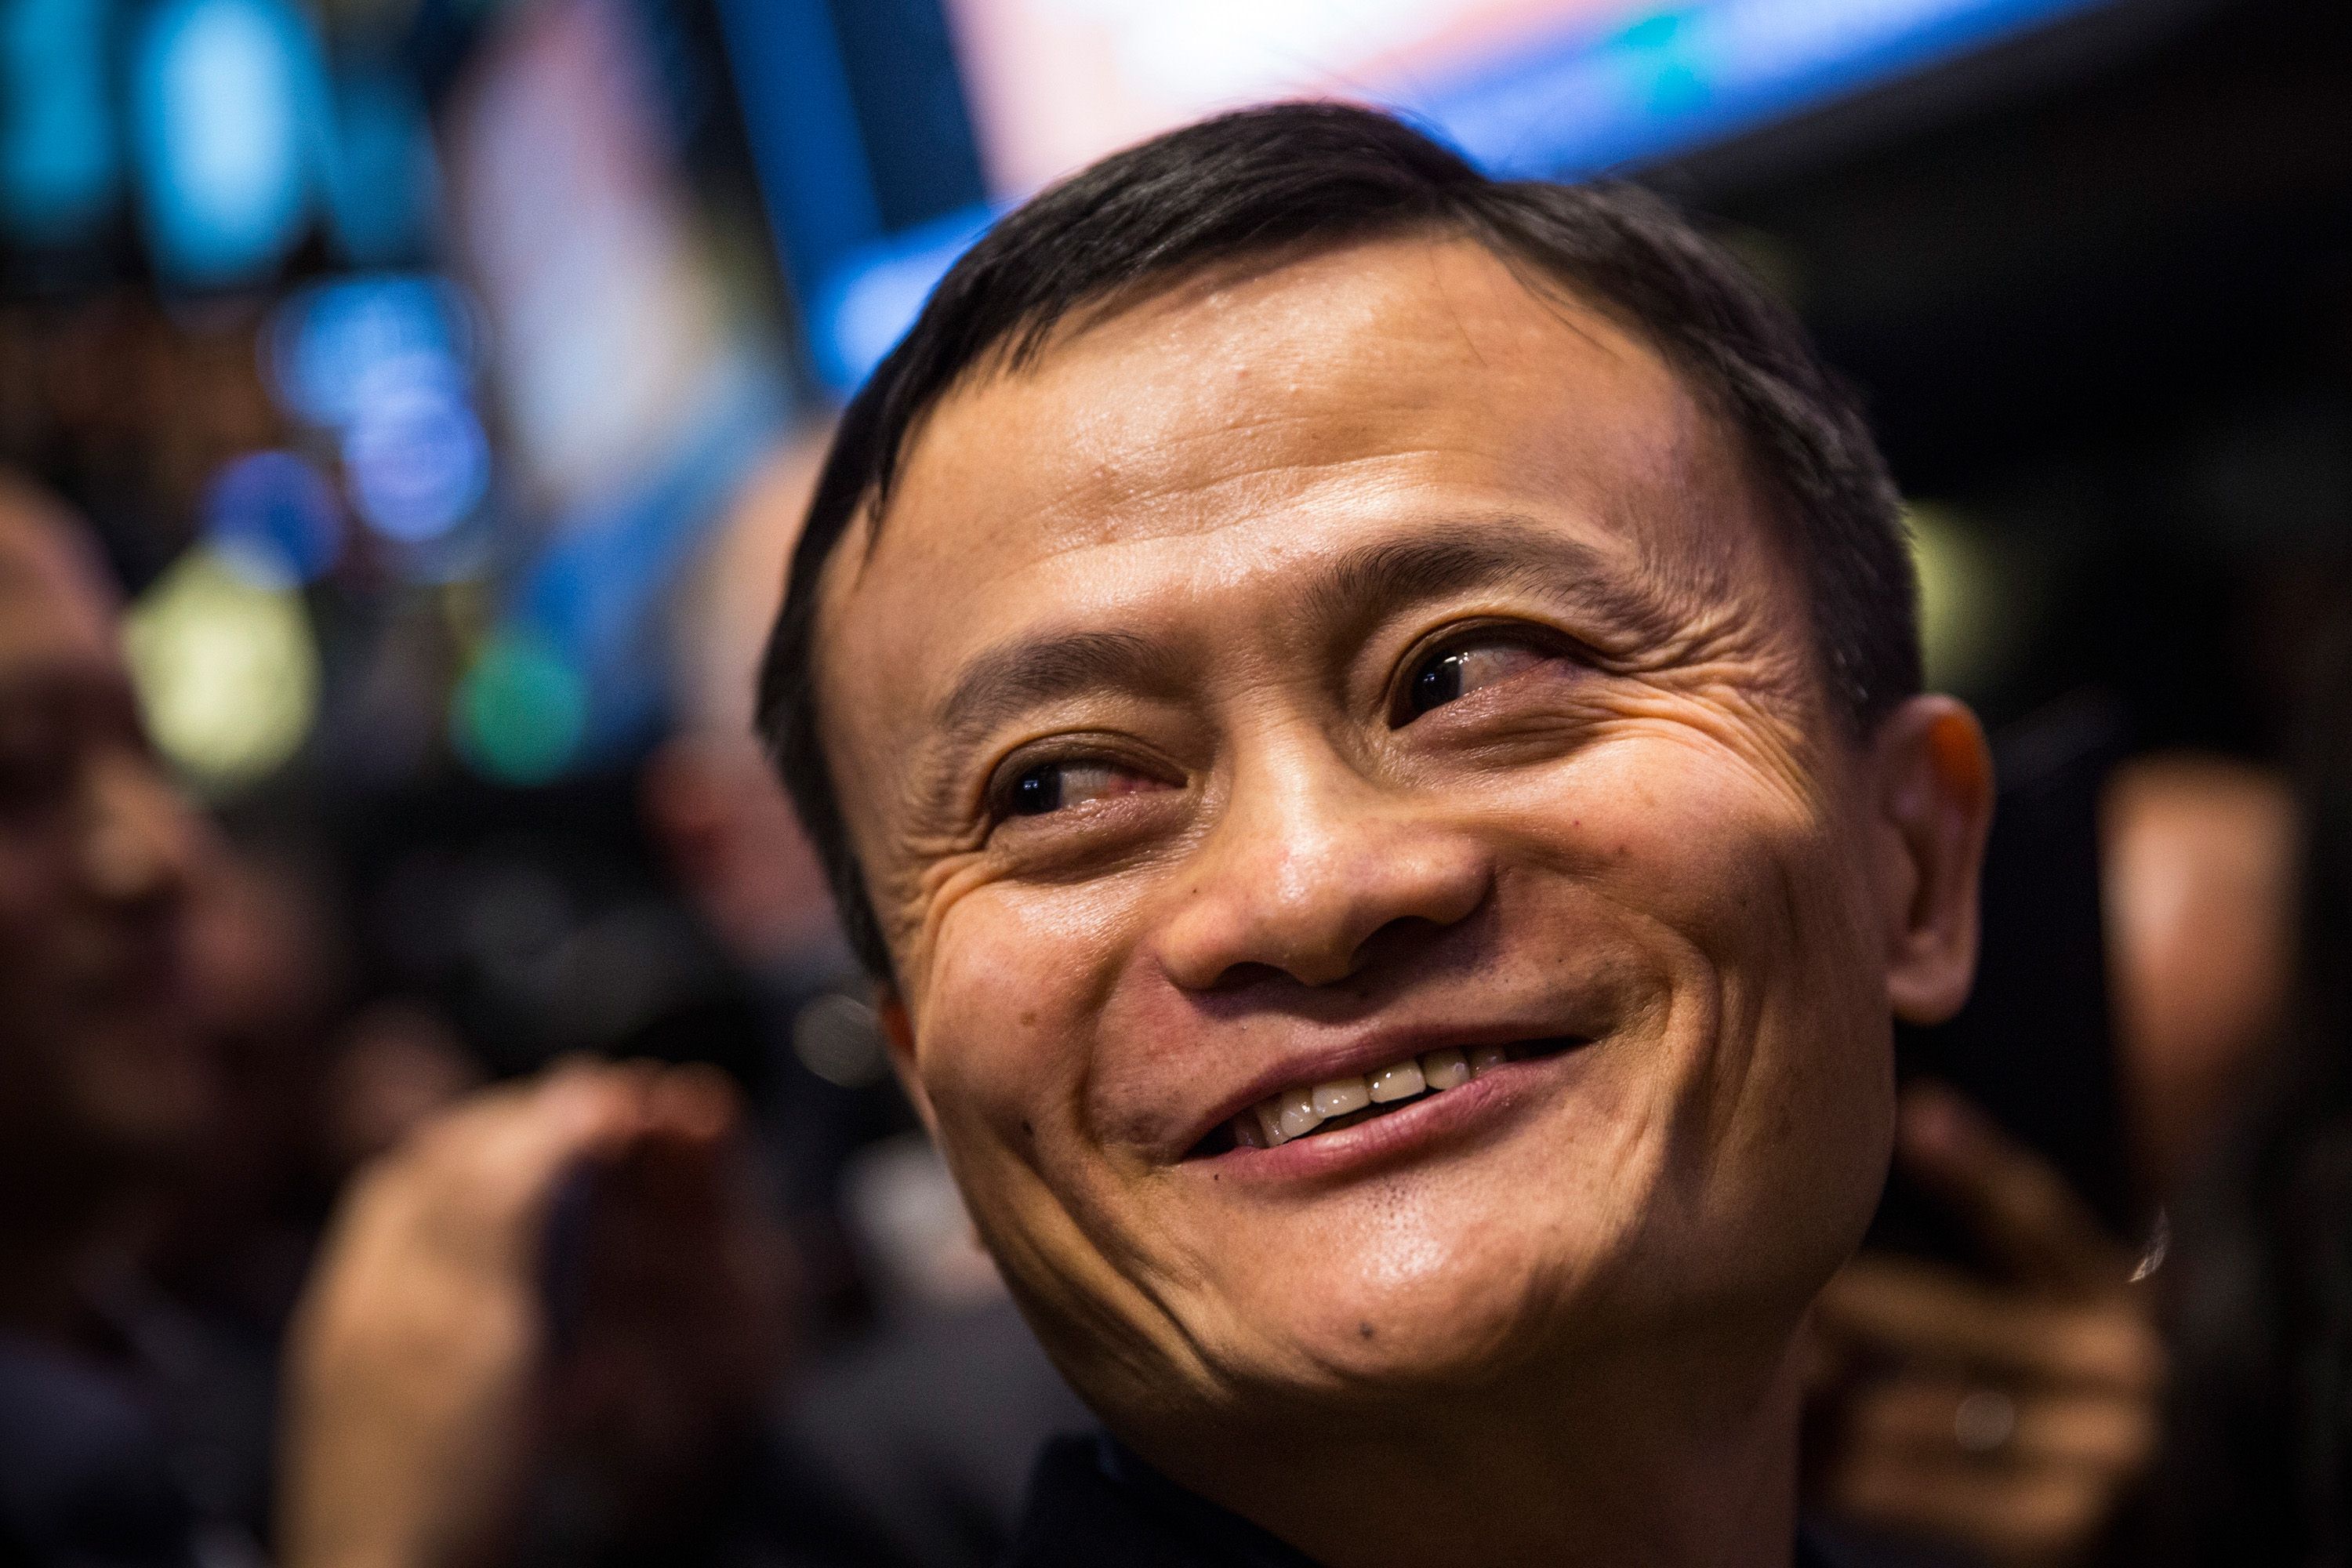 Jack Ma has long insisted that the company's guiding principle is to put the customer first, employees second and shareholders third. Photo: AFP